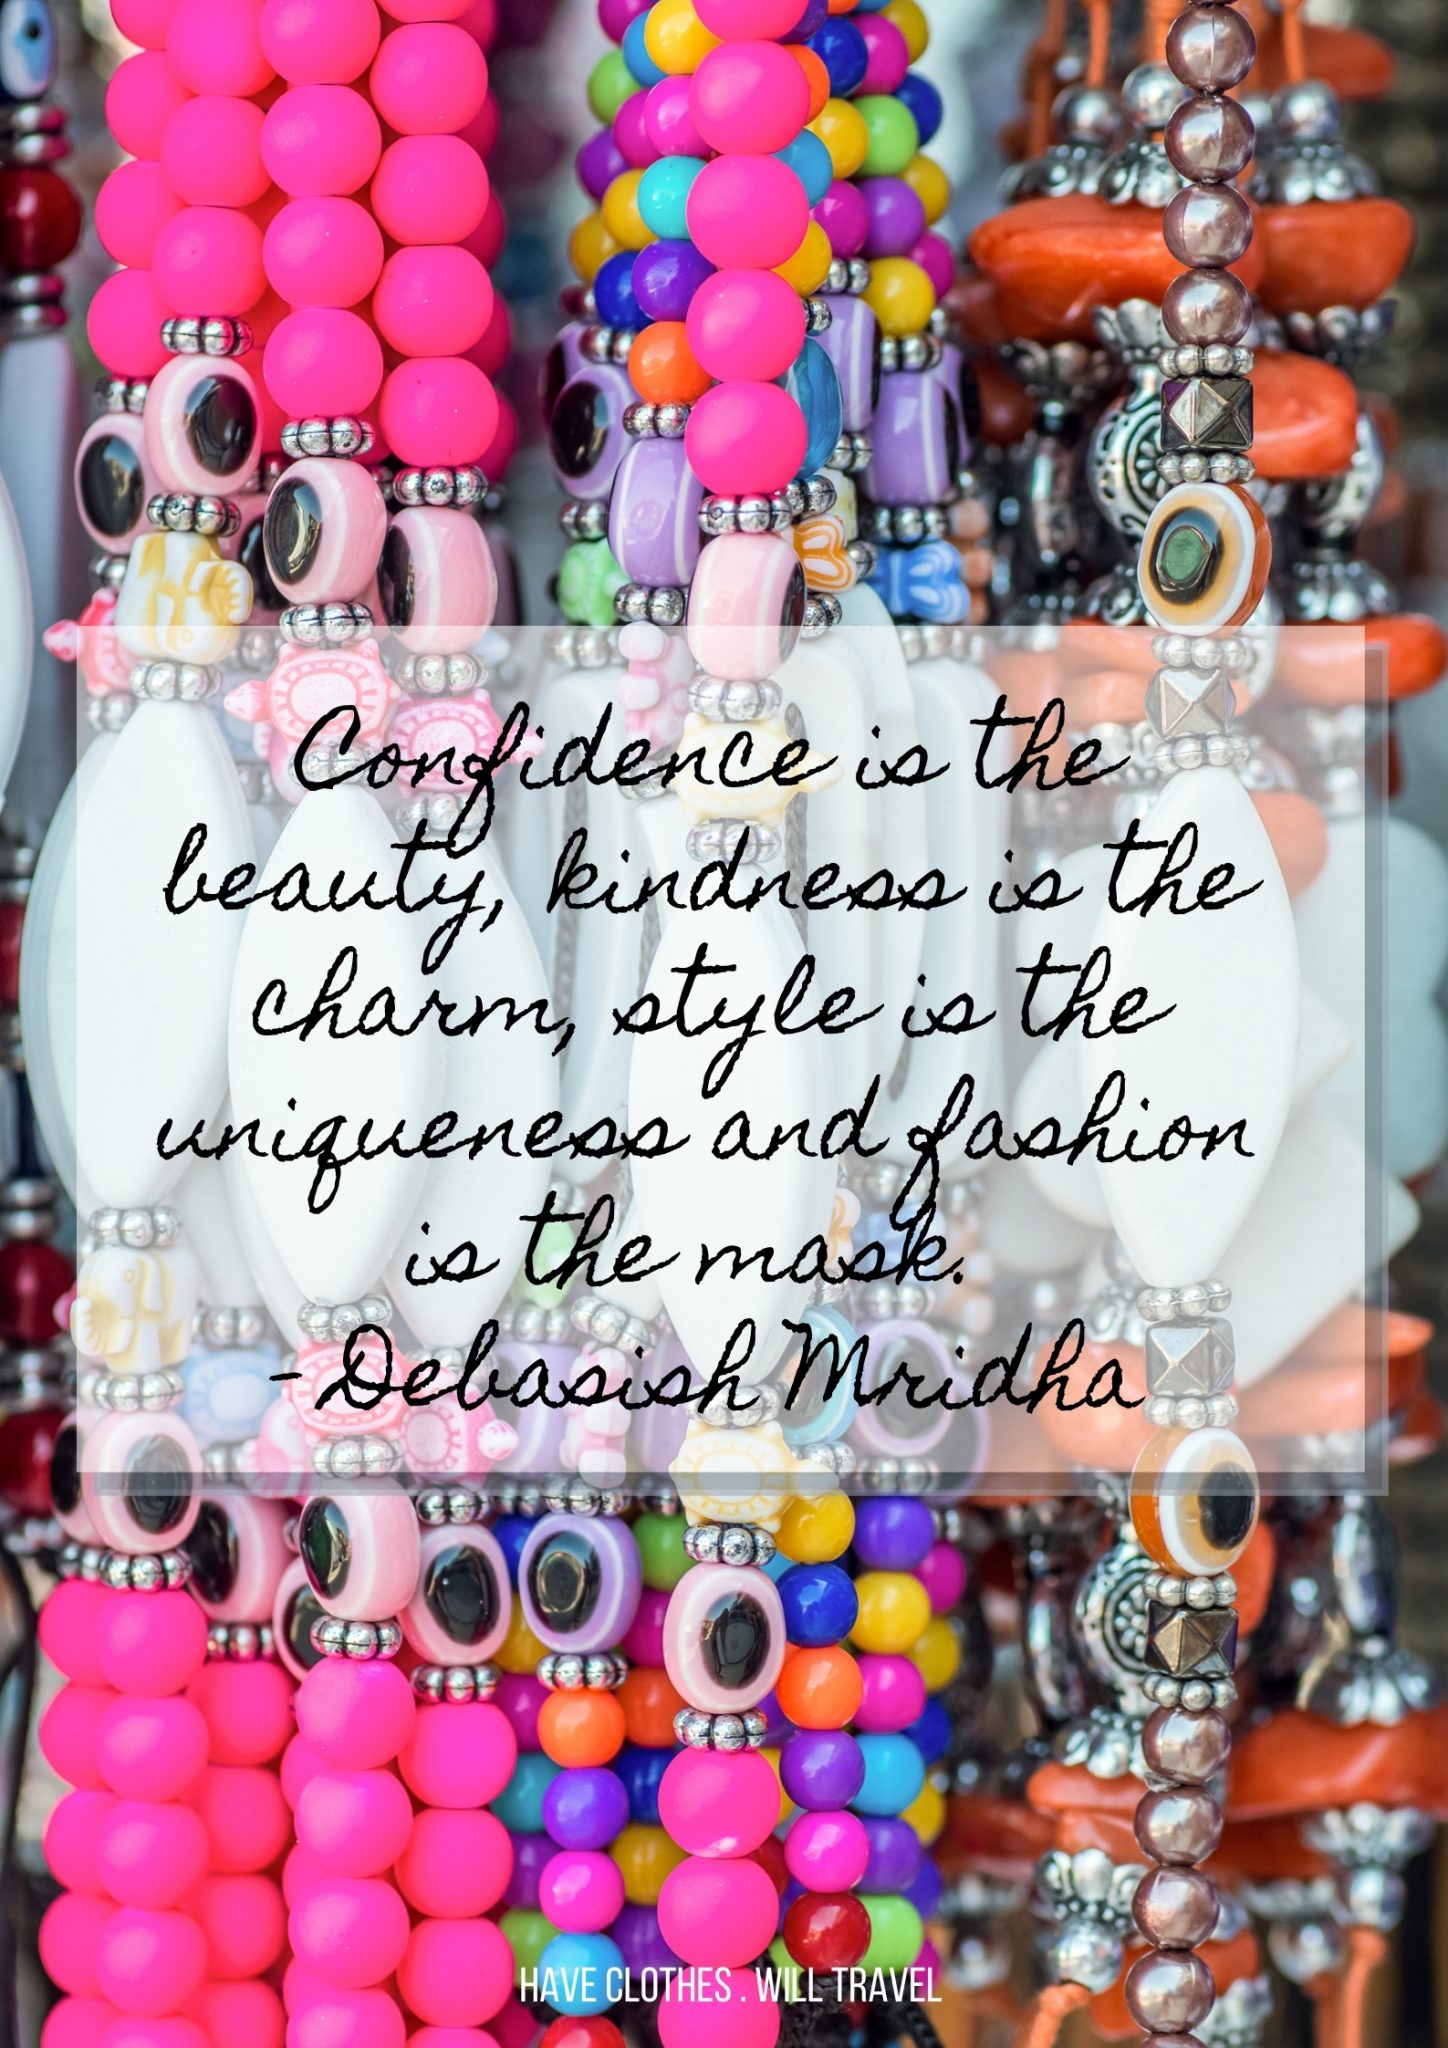 Colorful, chunky beaded necklaces hanging on a jewelry stand. Black cursive text over the image says, "Confidence is the beauty kindness is the charm and fashion is the mask. - Debasish Mridha"